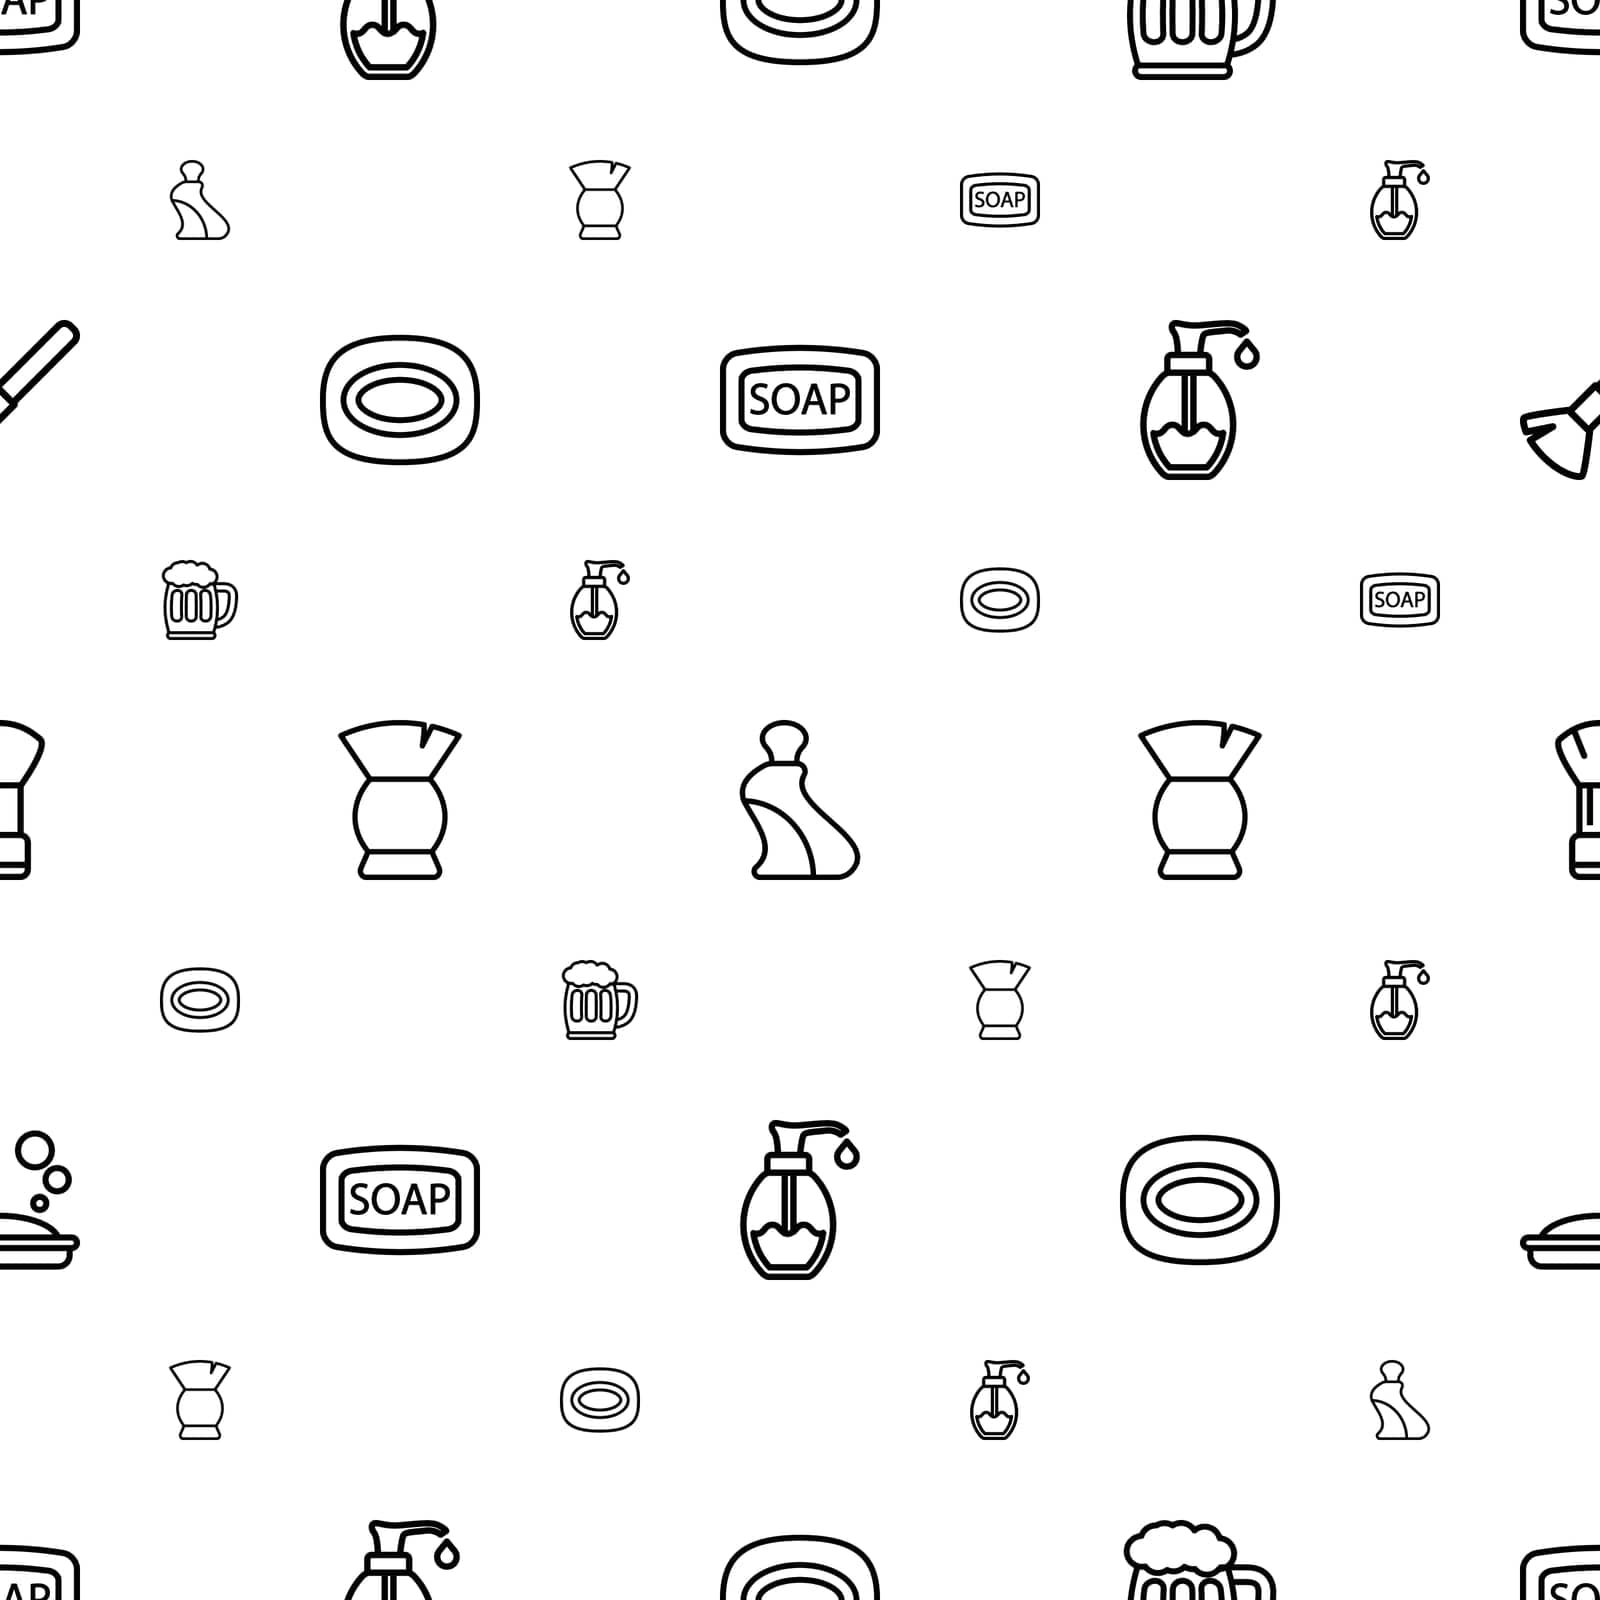 symbol,beauty,foam,pattern,icon,sign,skin,isolated,for,hair,bar,white,bubble,web,hygiene,and,design,vector,bath,graphic,beer,bathroom,brush,black,wash,mobile,health,cream,shaving,clean,water,cleanliness,plastic,tube,background,illustration,mug,soap,object,care by ogqcorp